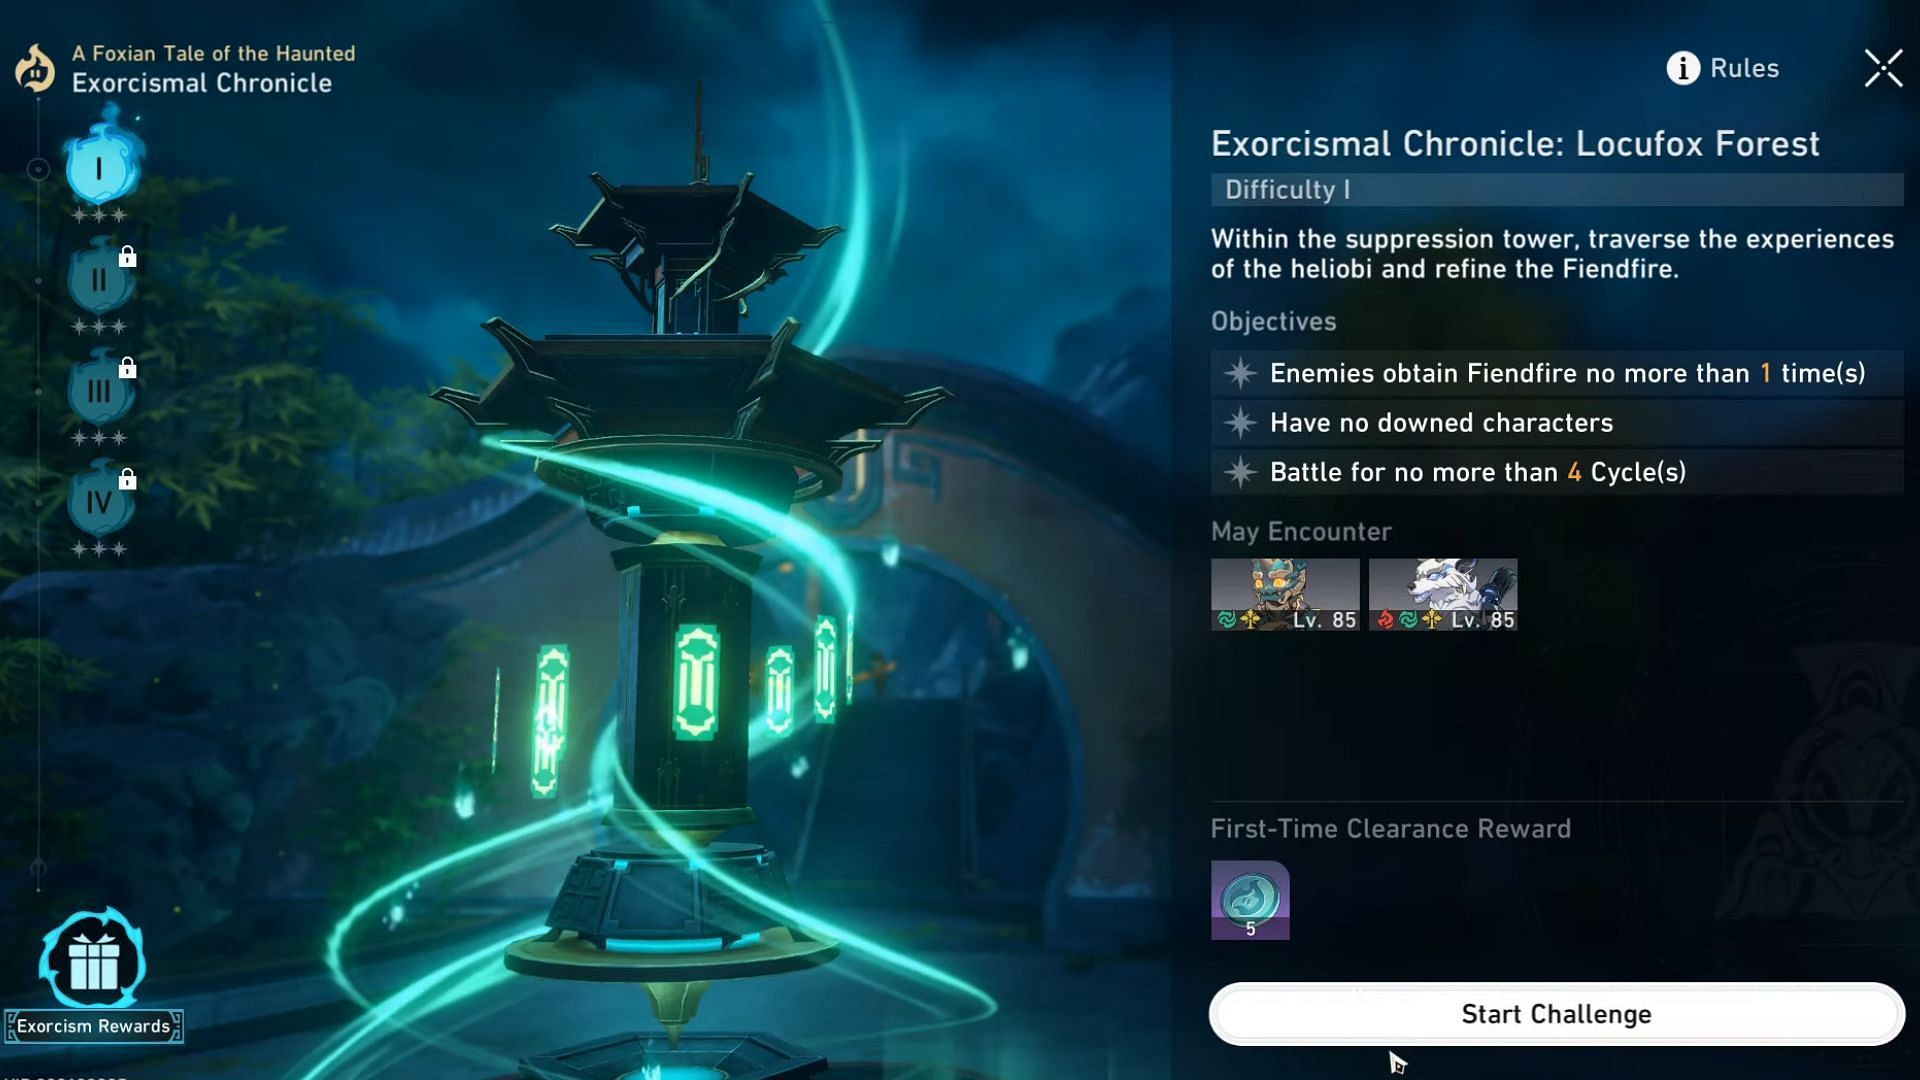 Image showing the Locufox Forest tower under Exorcismal Chronicles gamemode 